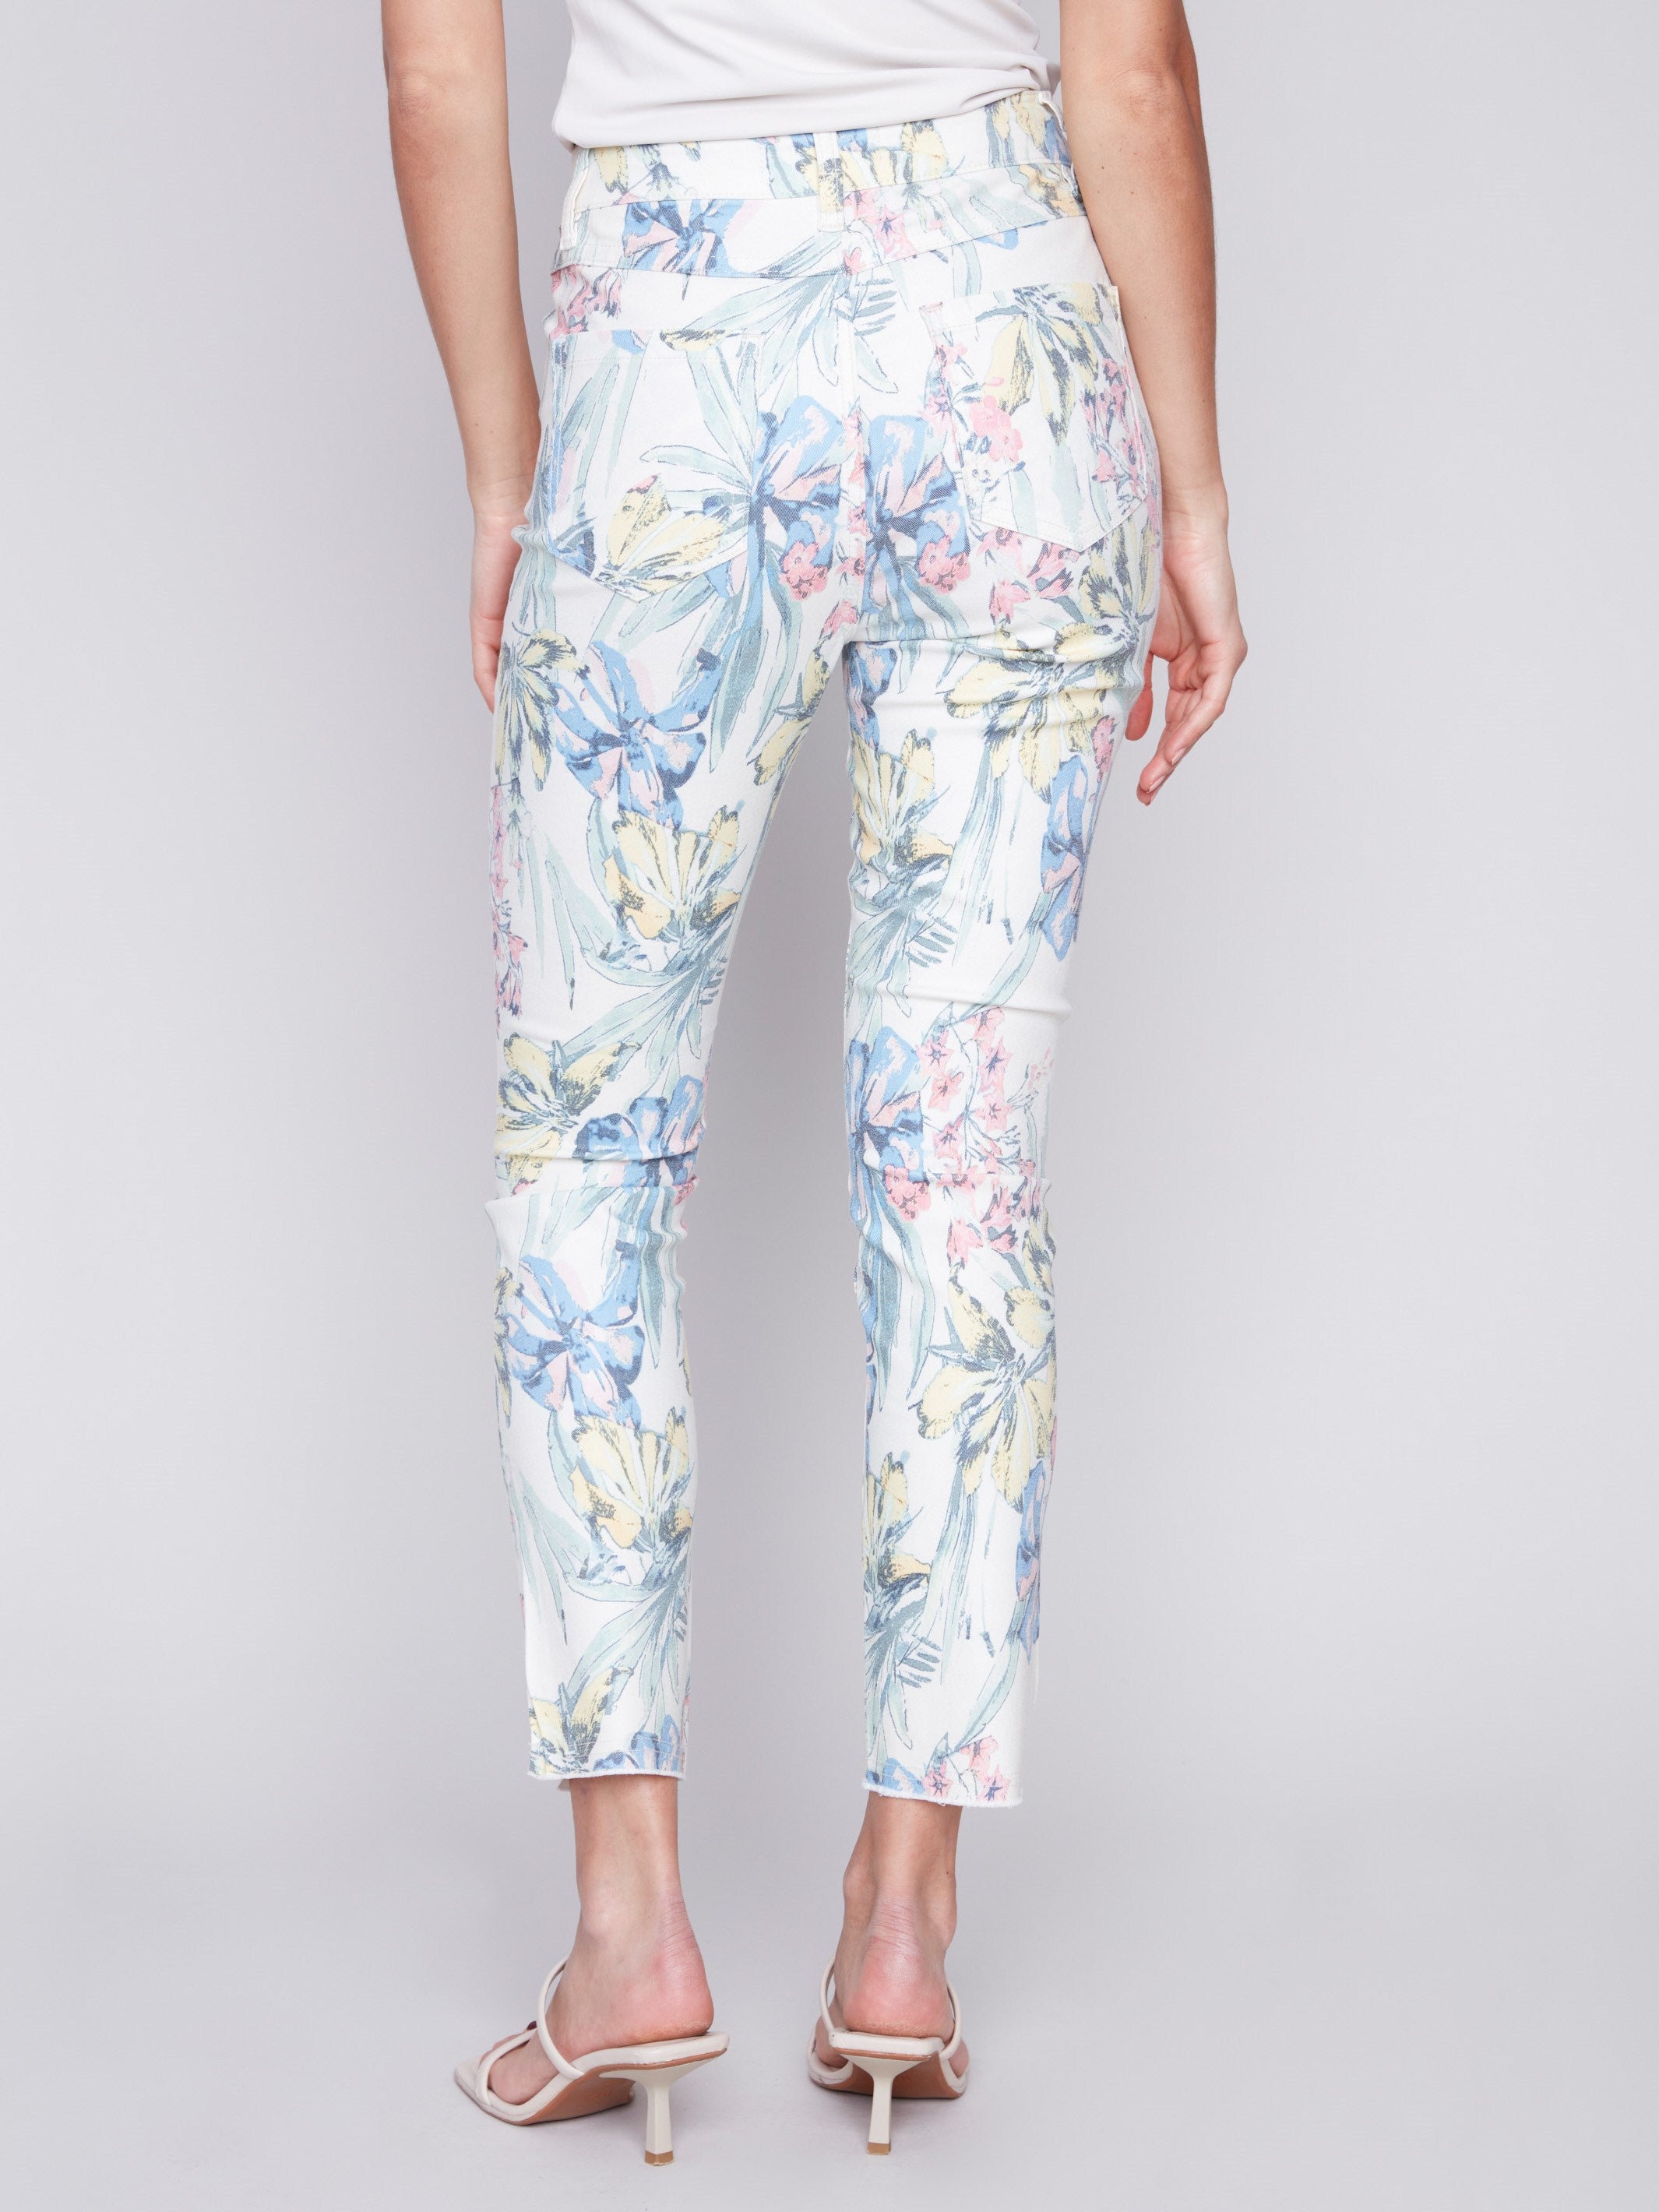 Printed Twill Pants with Hem Slit - Hawaii - Charlie B Collection Canada - Image 3